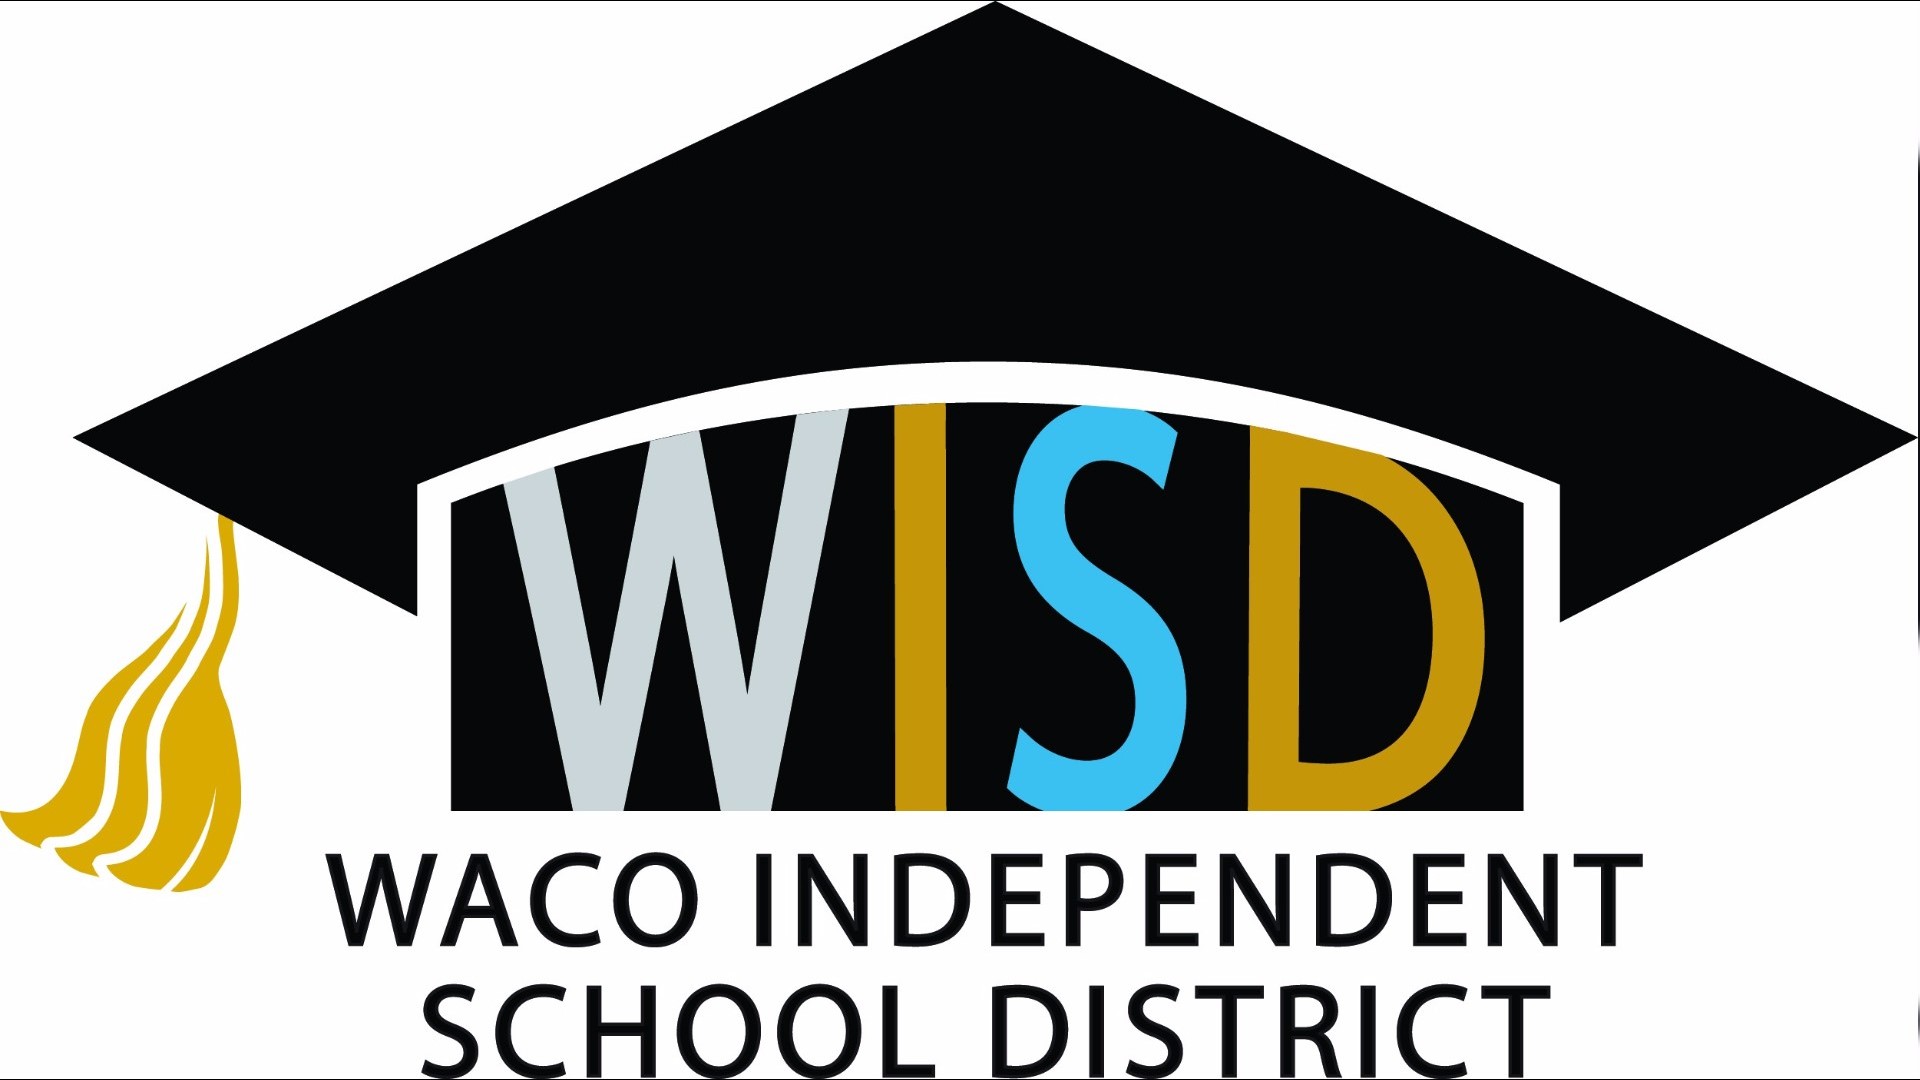 After Gov. Abott extended school closures to May 4th, Waco ISD decided it was best to cancel prom.